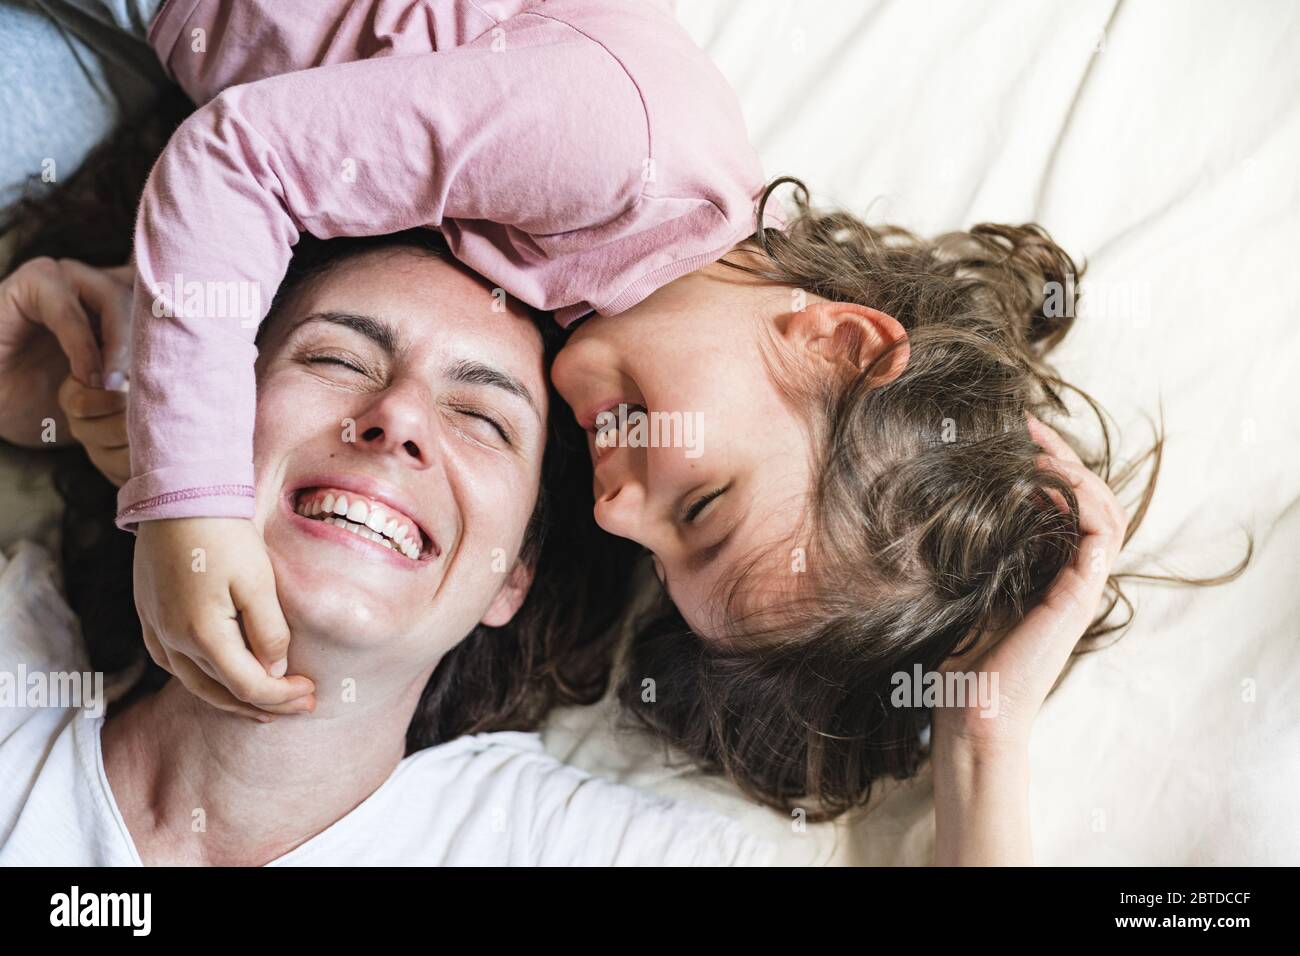 A little girl lays down in her mother's bed as she grabs her face and laughs. They are having a great time playing around Stock Photo